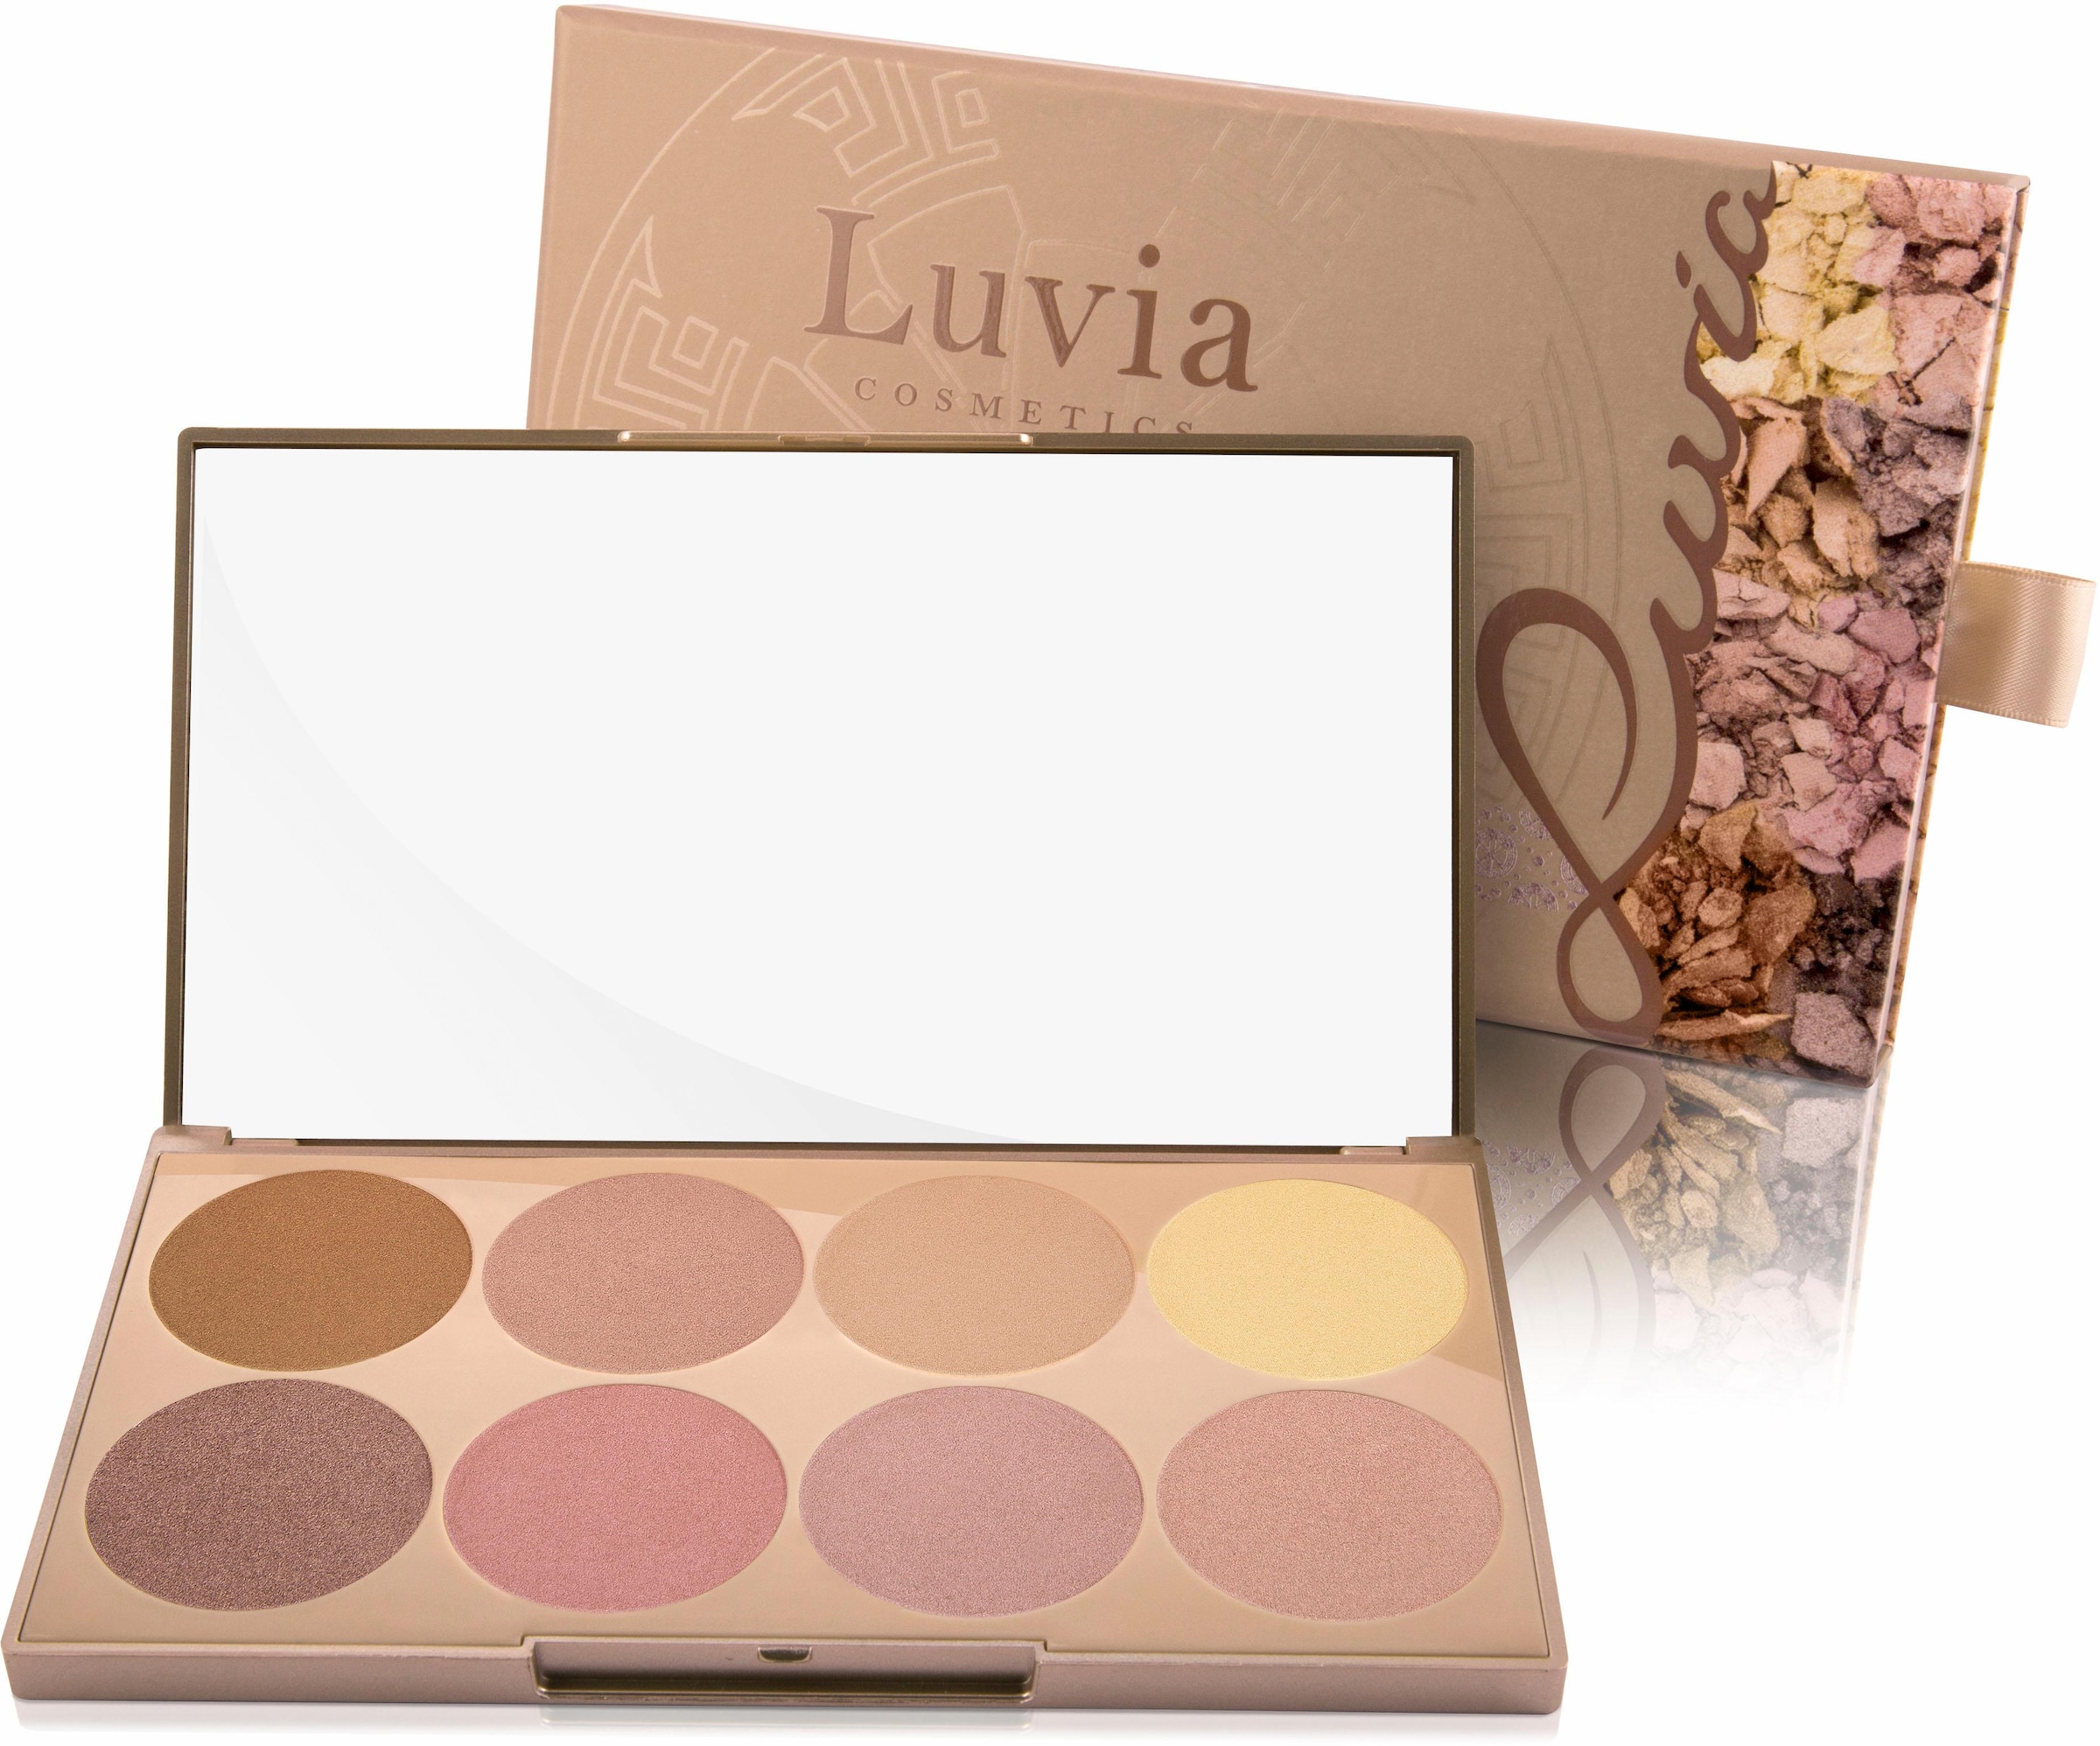 Shades (8 Cosmetics Vol. Glow tlg.) Essential Highlighter-Palette Farben Contouring Luvia »Prime 8 1«